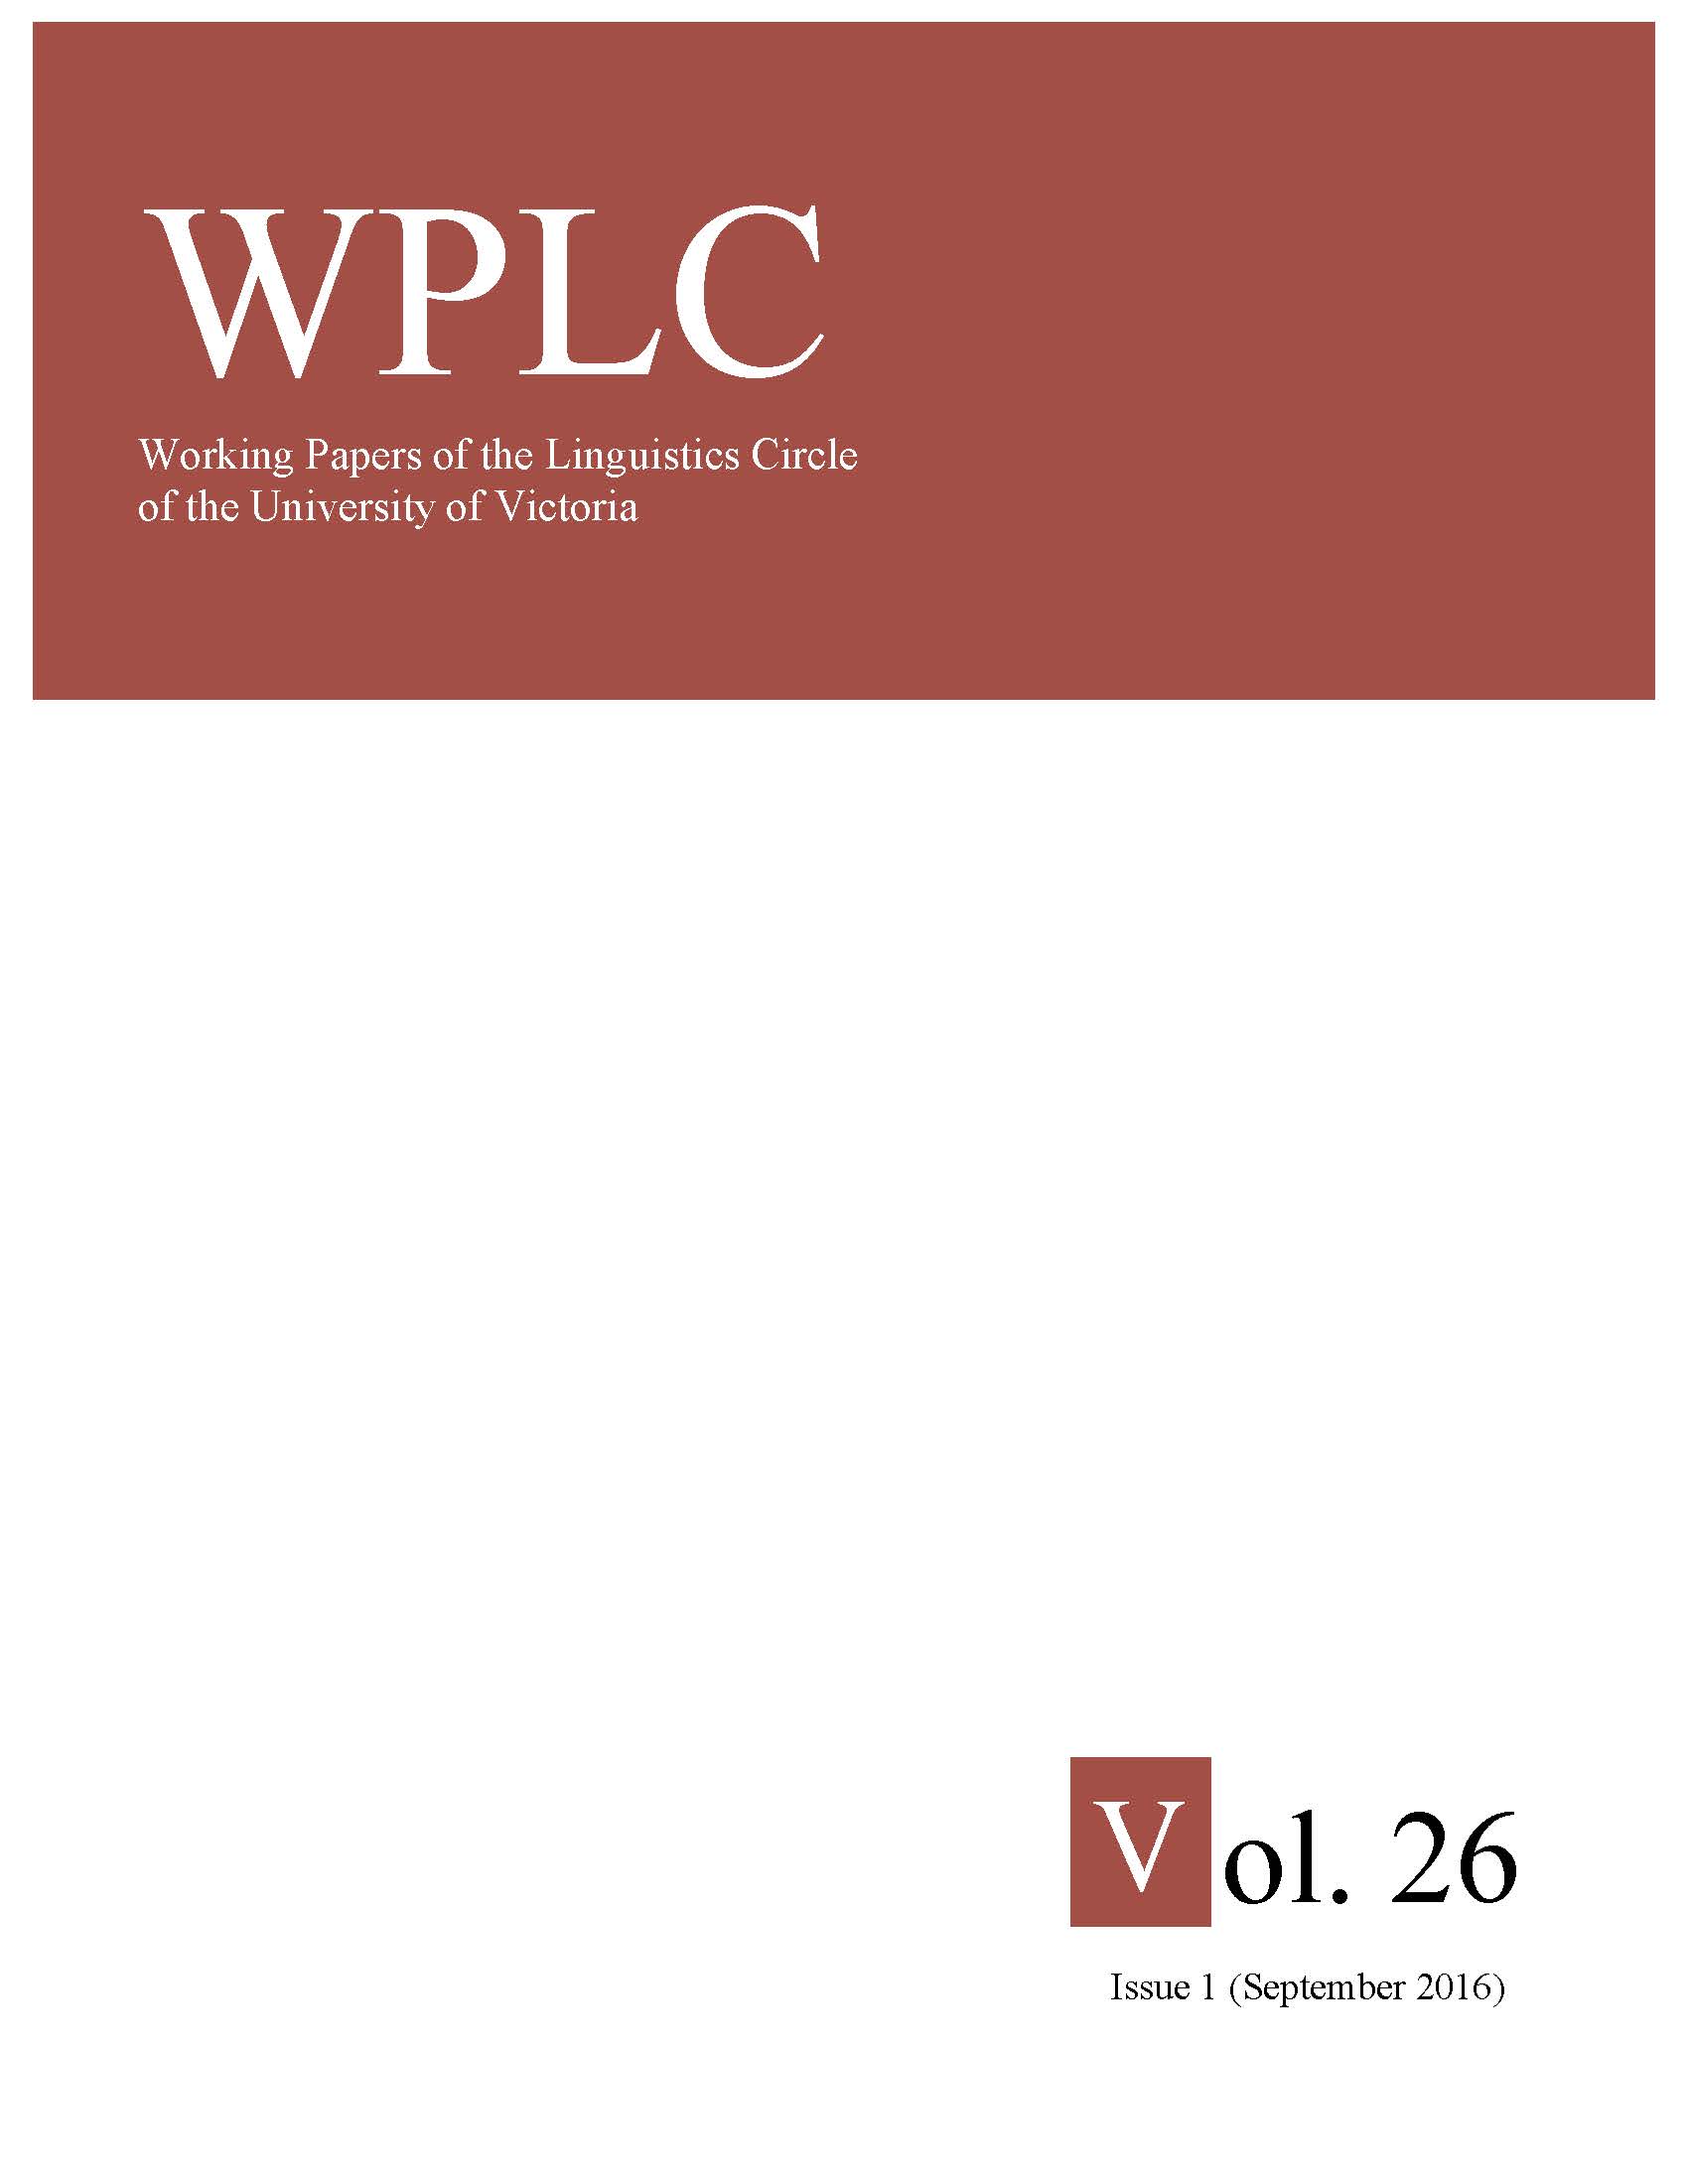 Working Papers of the Linguistics Circle